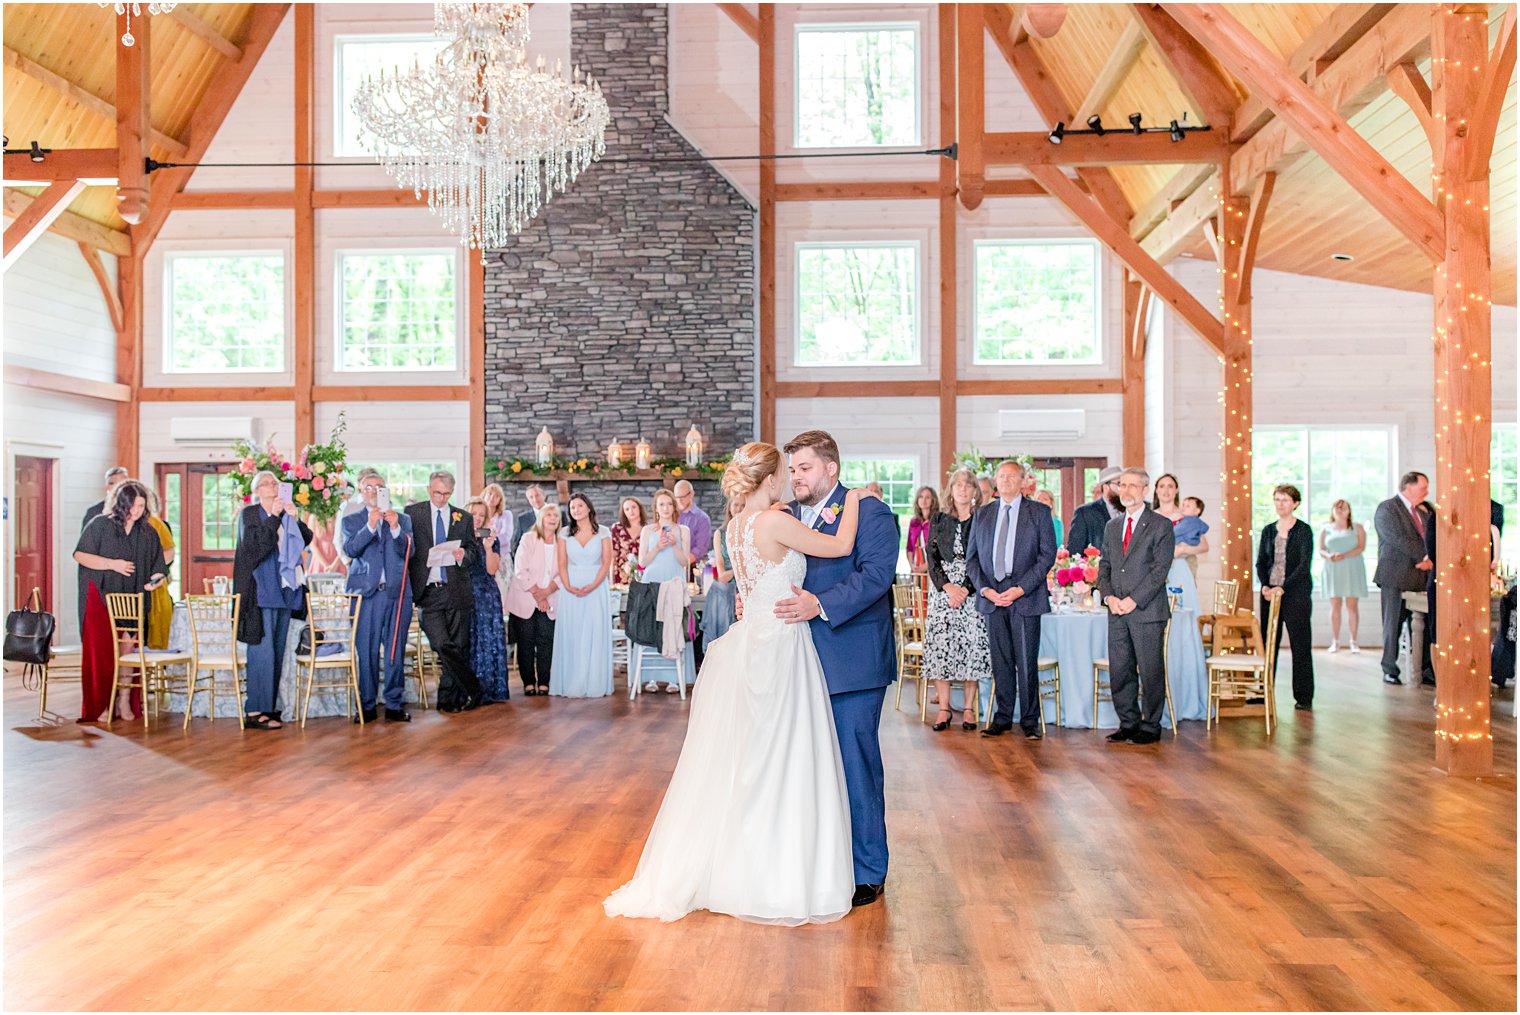 newlyweds have first dance during Virginia wedding reception 